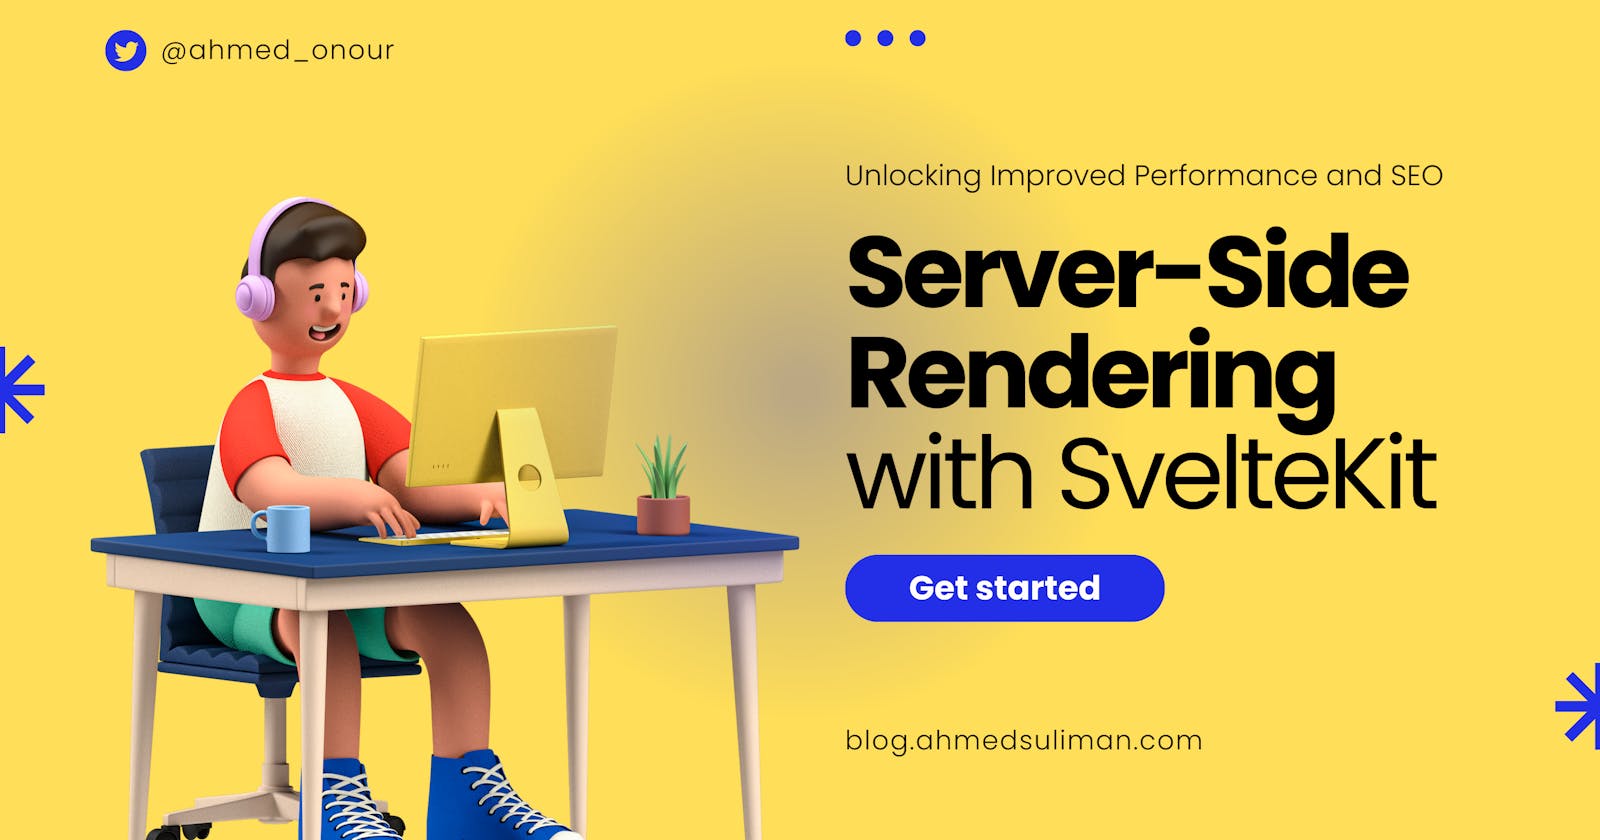 Unlocking Improved Performance and SEO with SvelteKit's Server-Side Rendering (SSR)